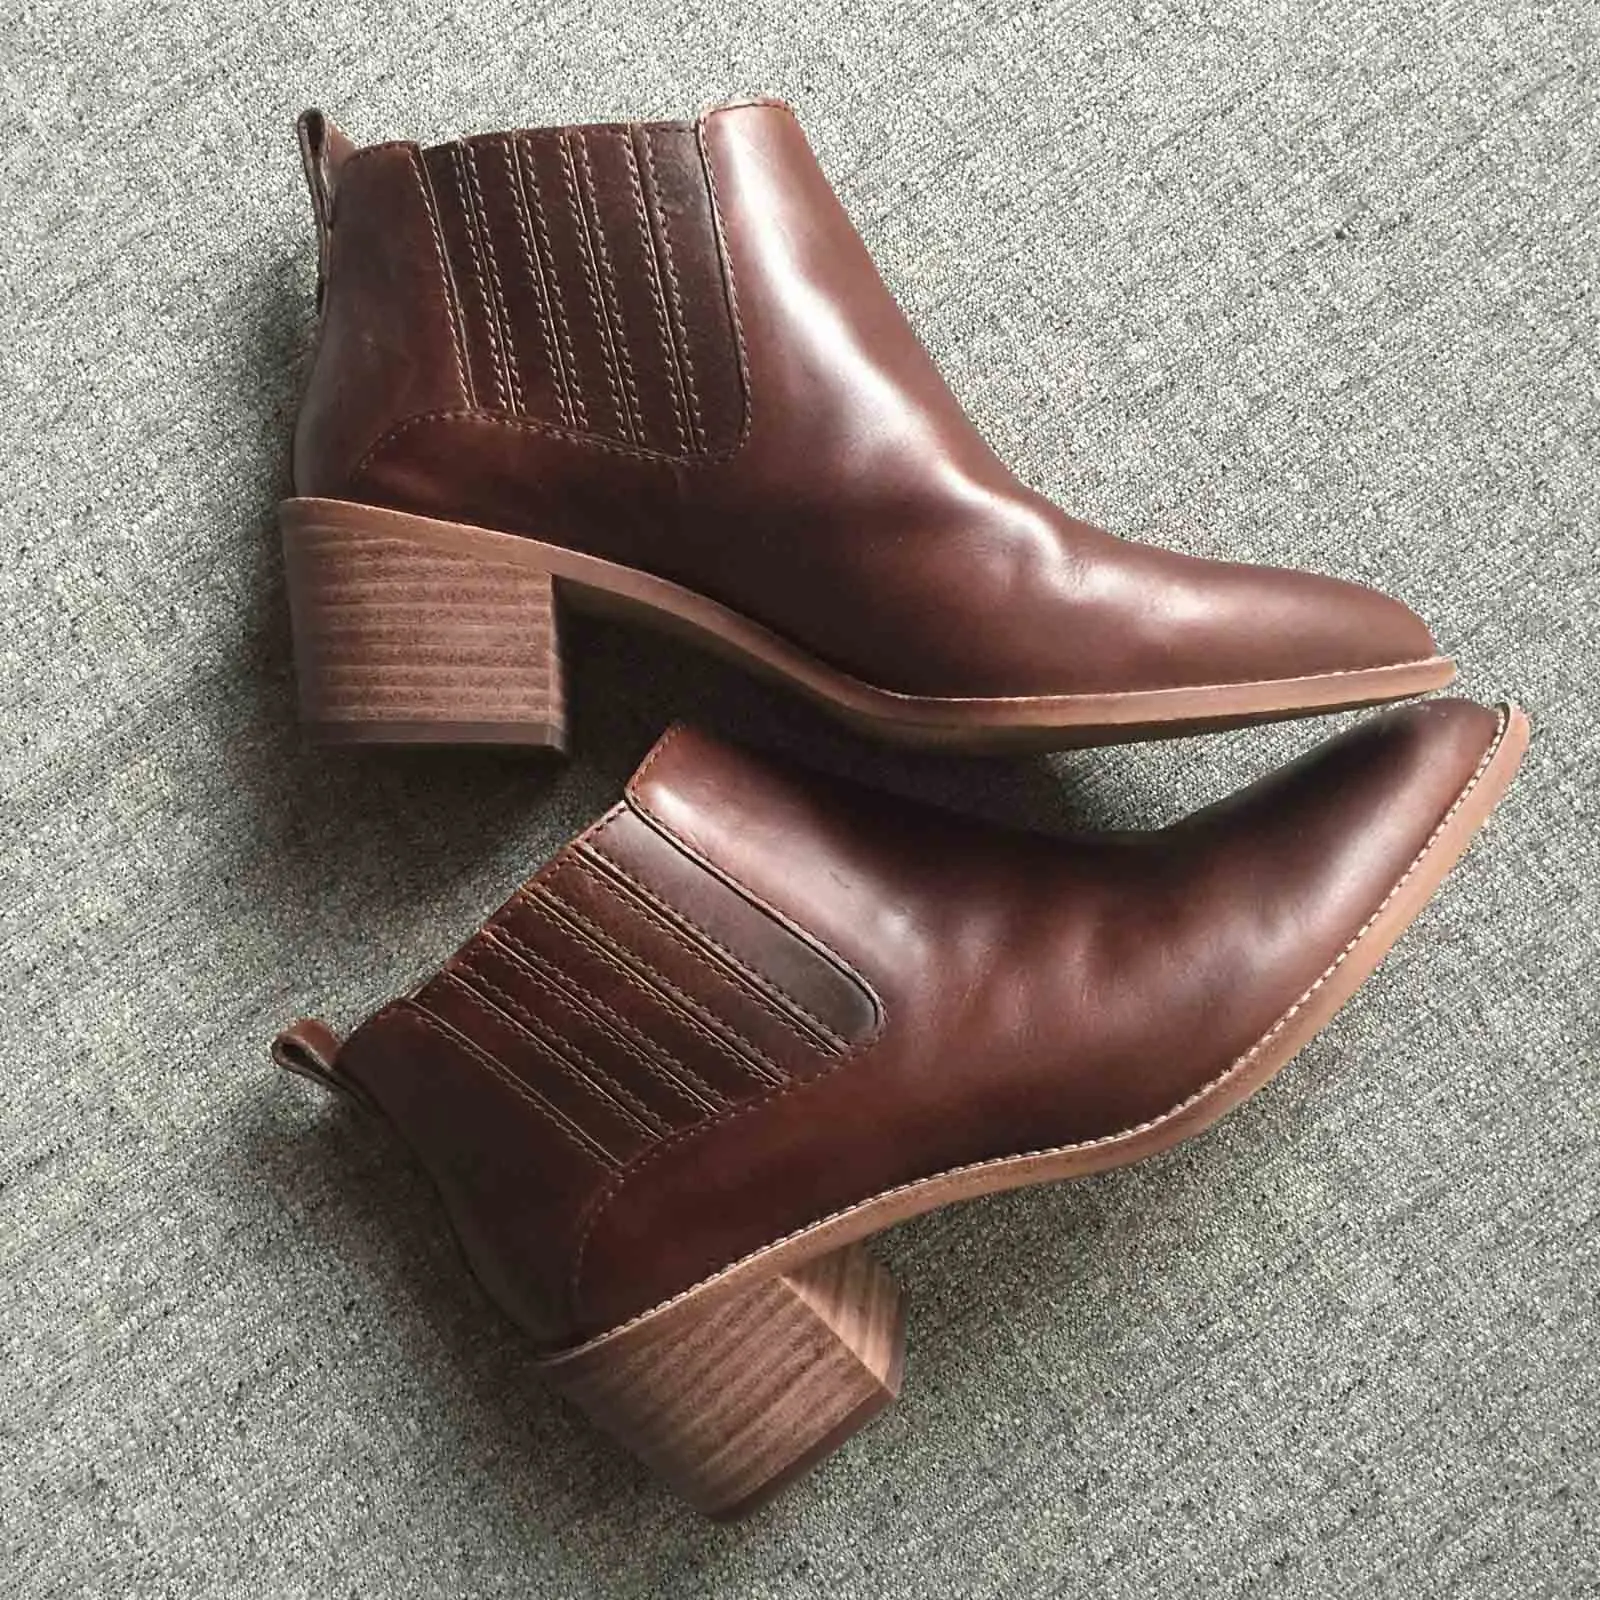 nordstrom anniversary sale, madewell boots